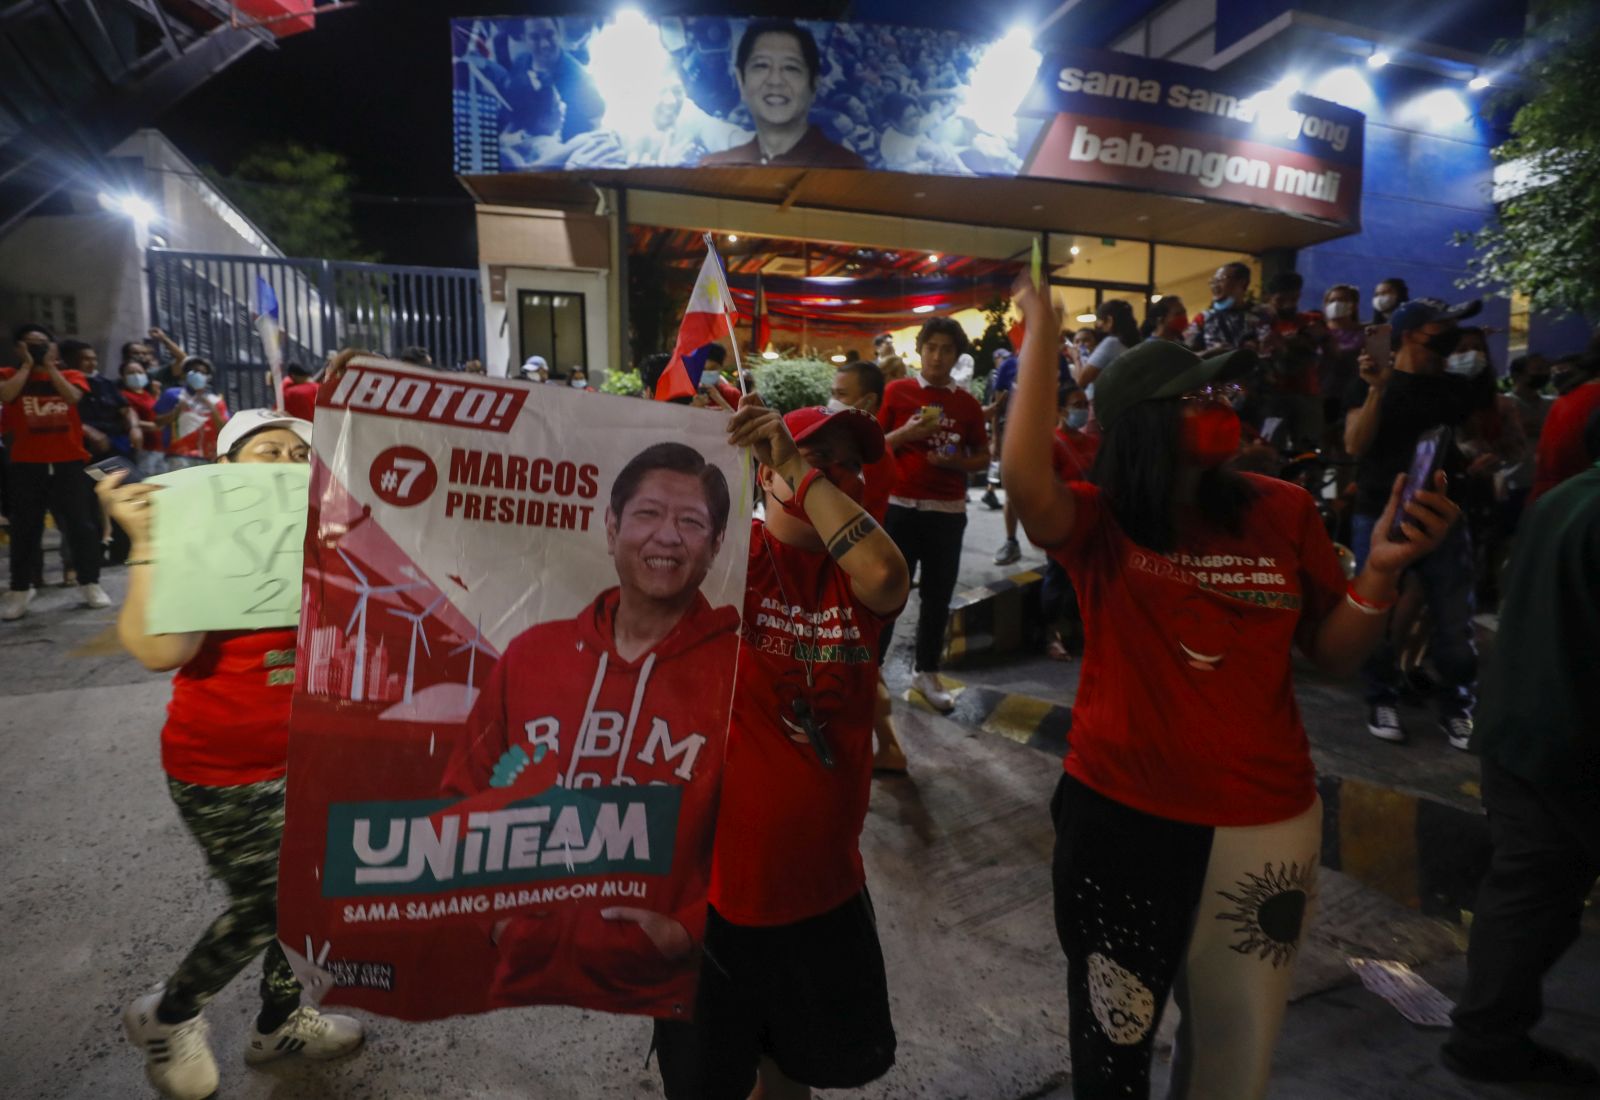 epa09936256 Supporters of presidential candidate Ferdinand 'Bongbong' Marcos Jr. cheer outside his campaign headquarters in Mandaluyong City, Metro Manila, Philippines 09 May 2022. Some 67 million Filipinos are expected to flock to voting centers across the country for the 09 May national elections. Among the candidates for the presidency are incumbent Vice-President Leni Robredo, Ferdinand 'Bongbong' Marcos Jr., son of the late president Ferdinand Marcos, and international boxing icon Manny Pacquiao.  EPA/ROLEX DELA PENA